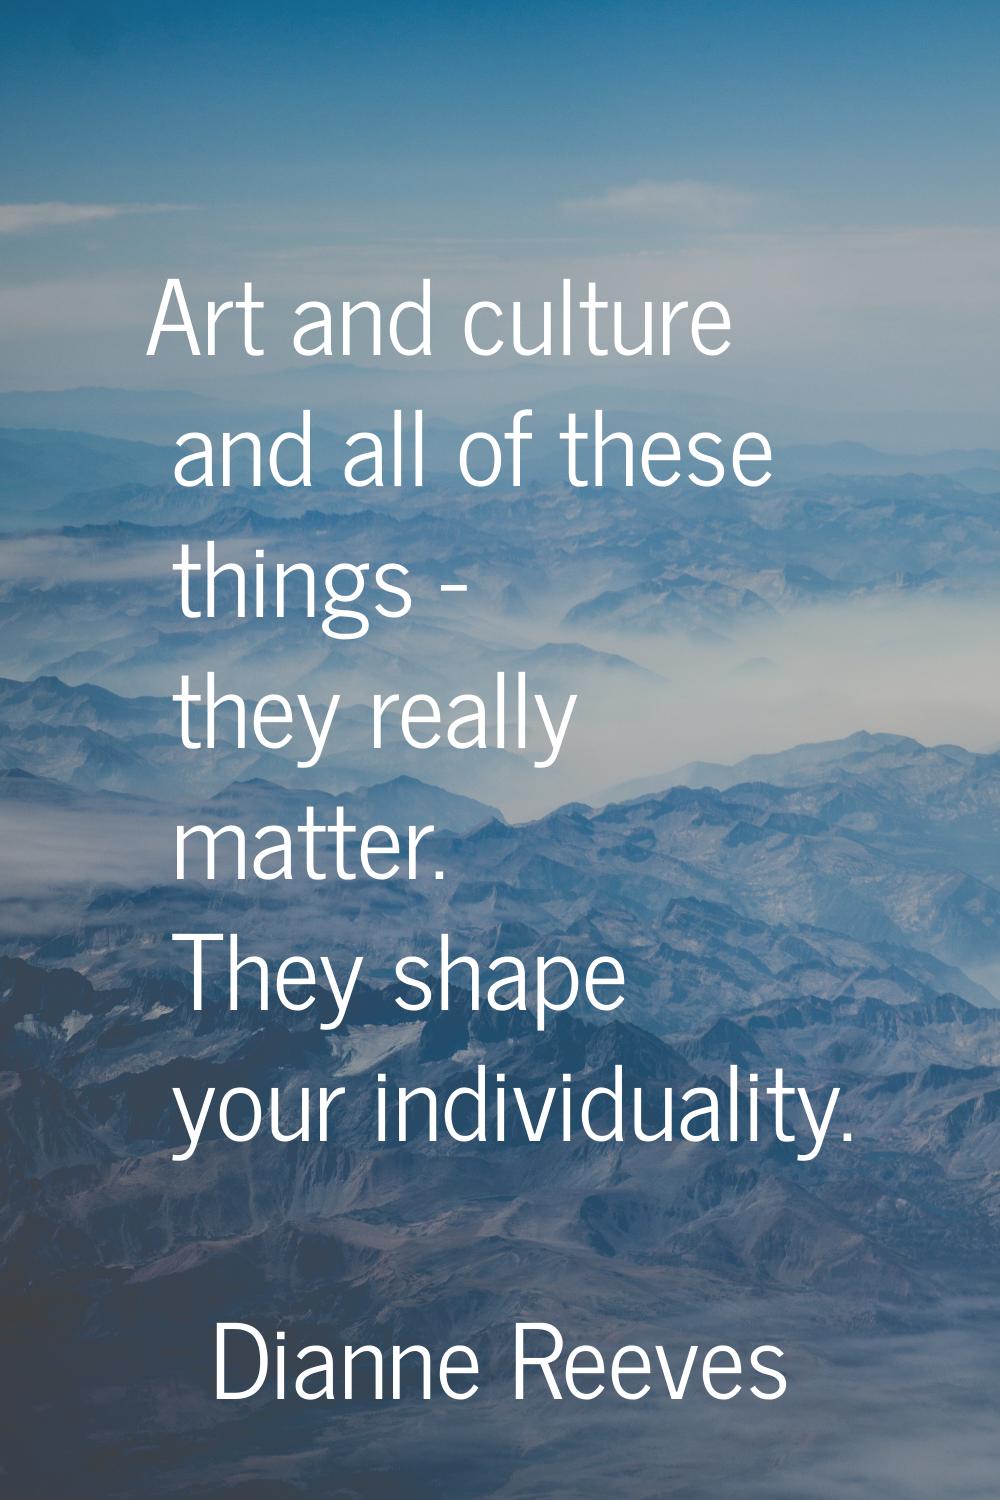 Art and culture and all of these things - they really matter. They shape your individuality.